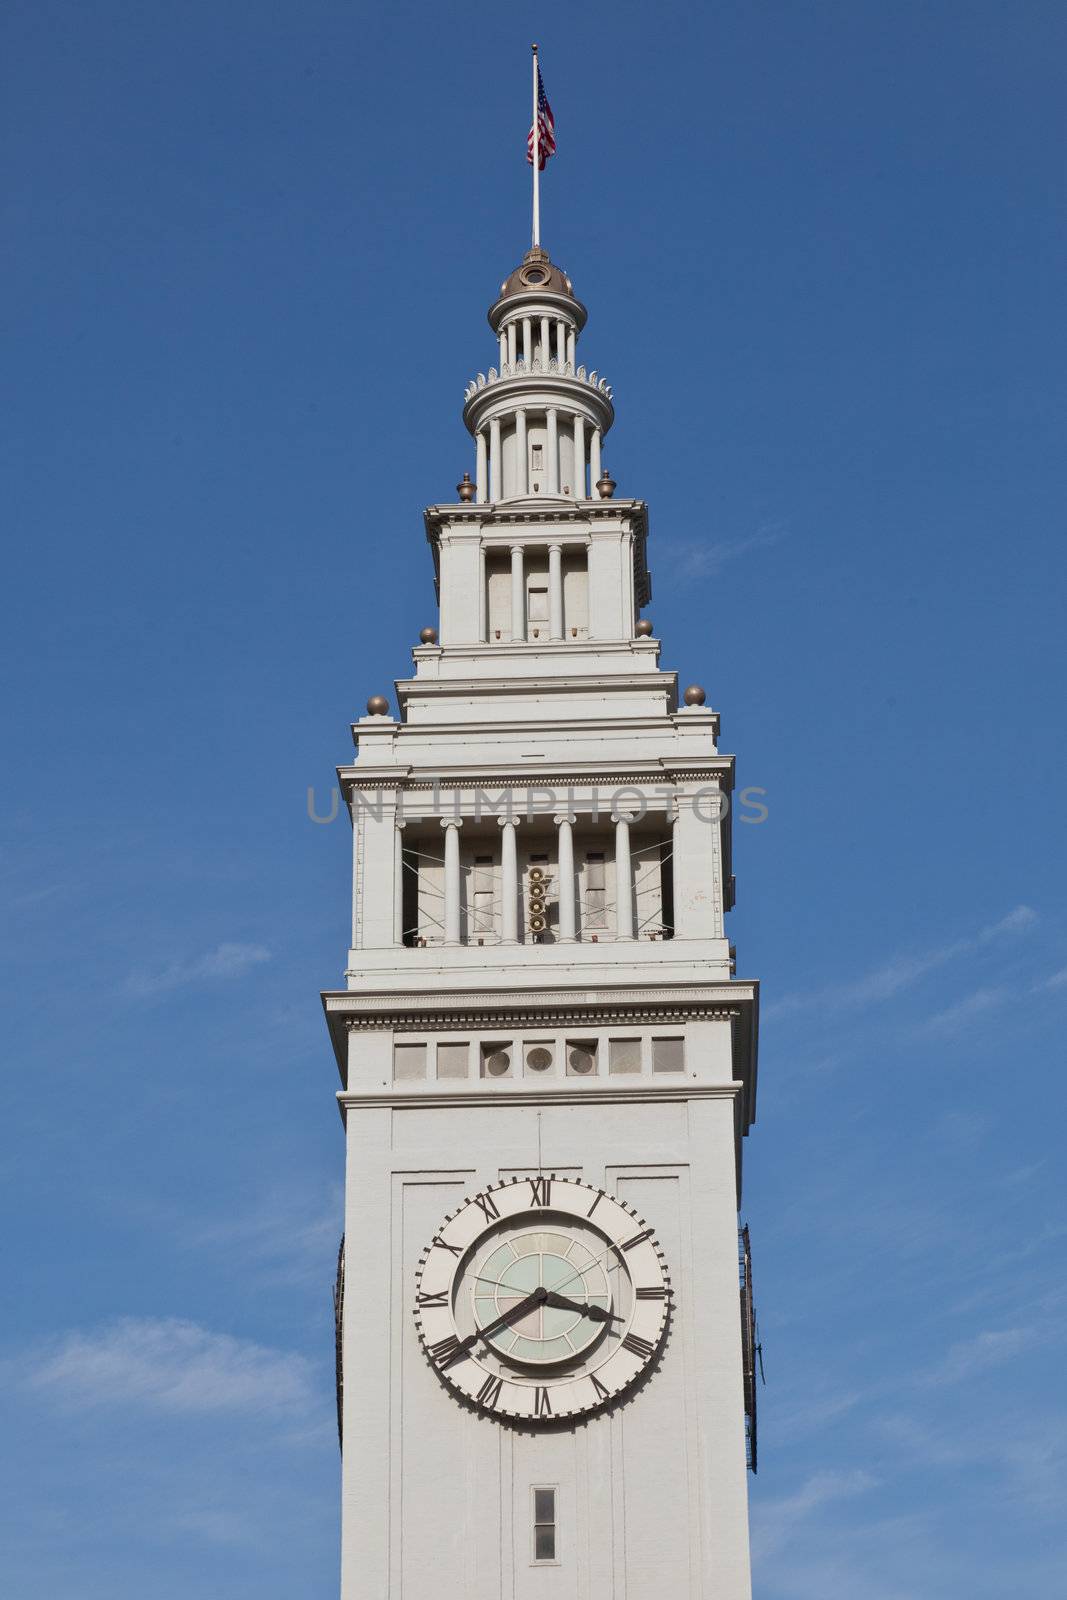 San Francisco Ferry Building is a terminal for ferries that travel across the San Francisco Bay and a shopping center